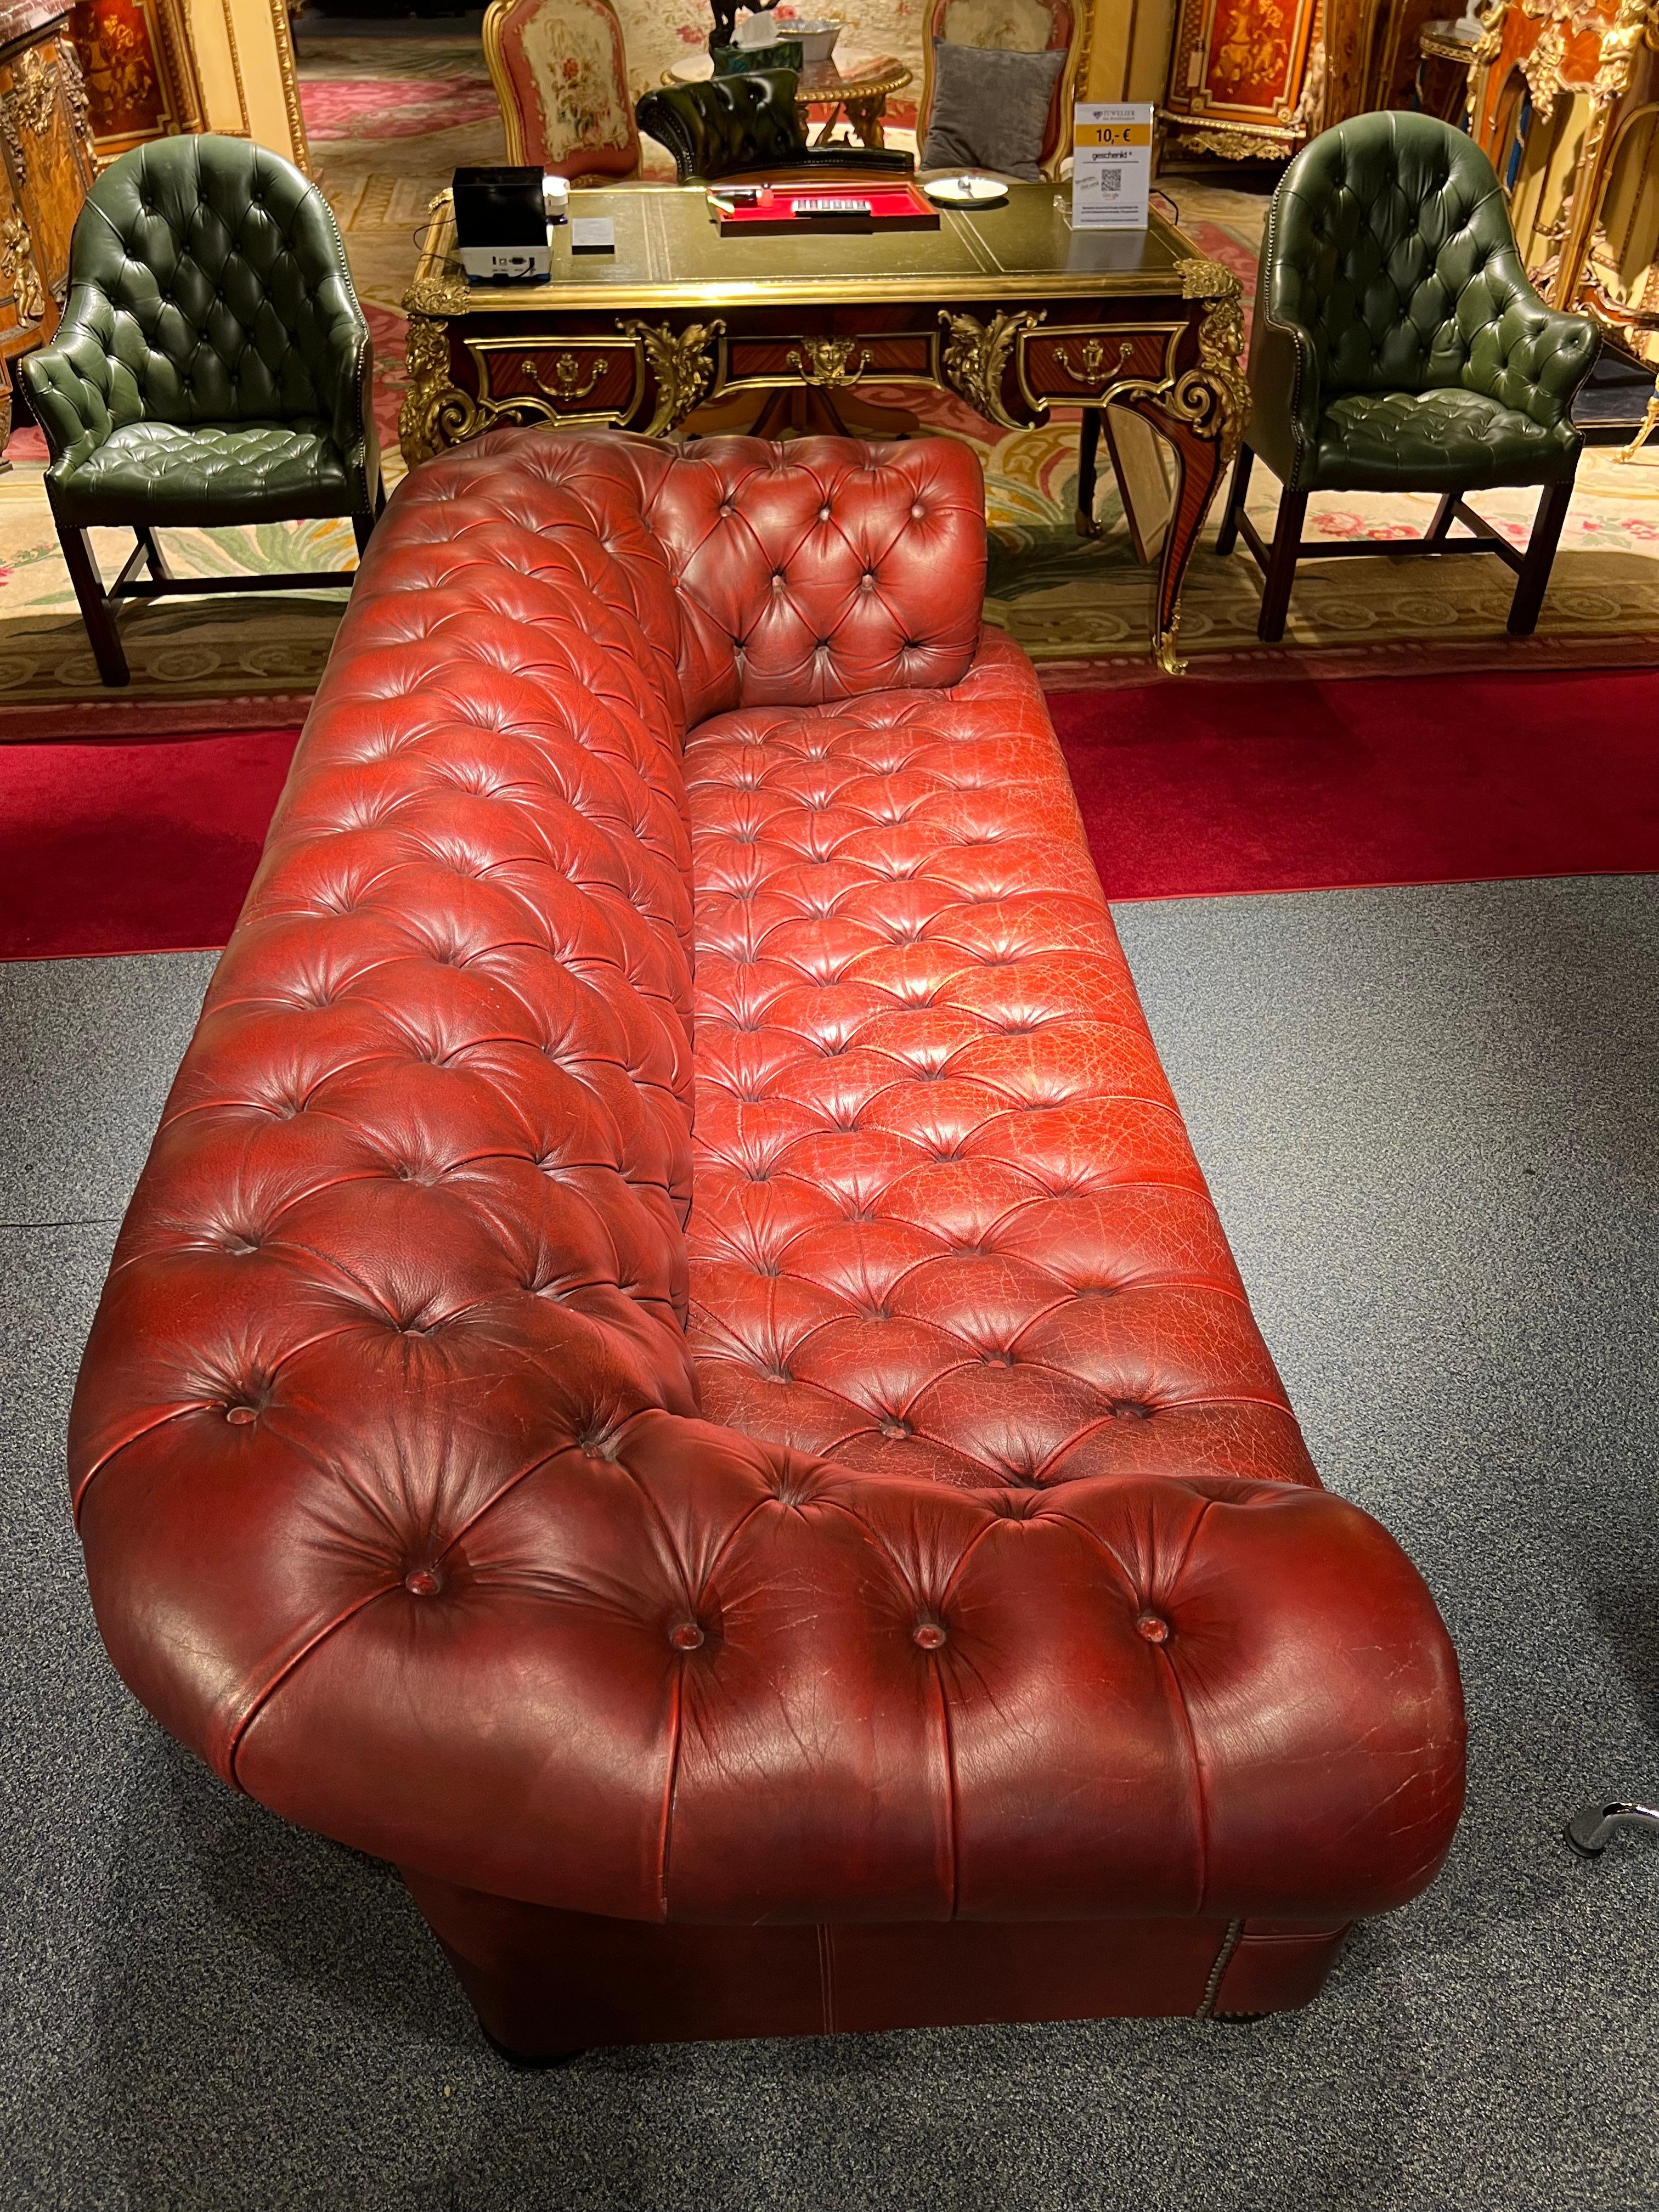 Stunning Vintage English Red Leather Chesterfield 3 Seater Sofa For Sale 1